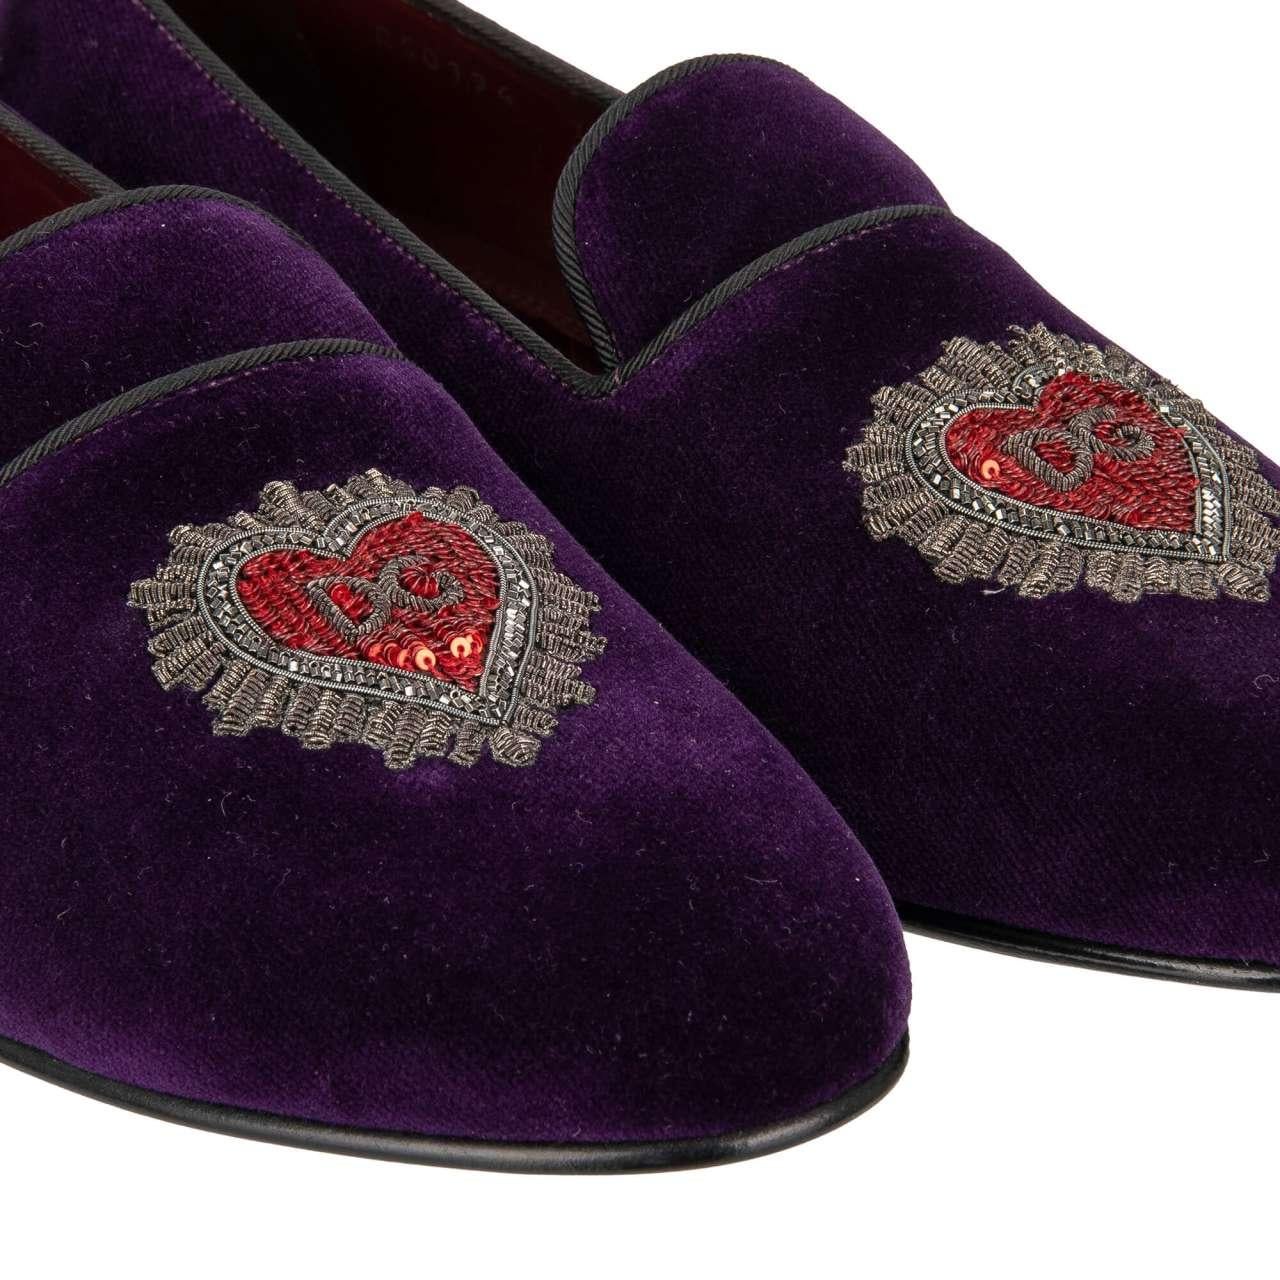 D&G - Heart Logo Embroidered Velvet Loafer YOUNG POPE Purple Red EUR 40 In Excellent Condition For Sale In Erkrath, DE